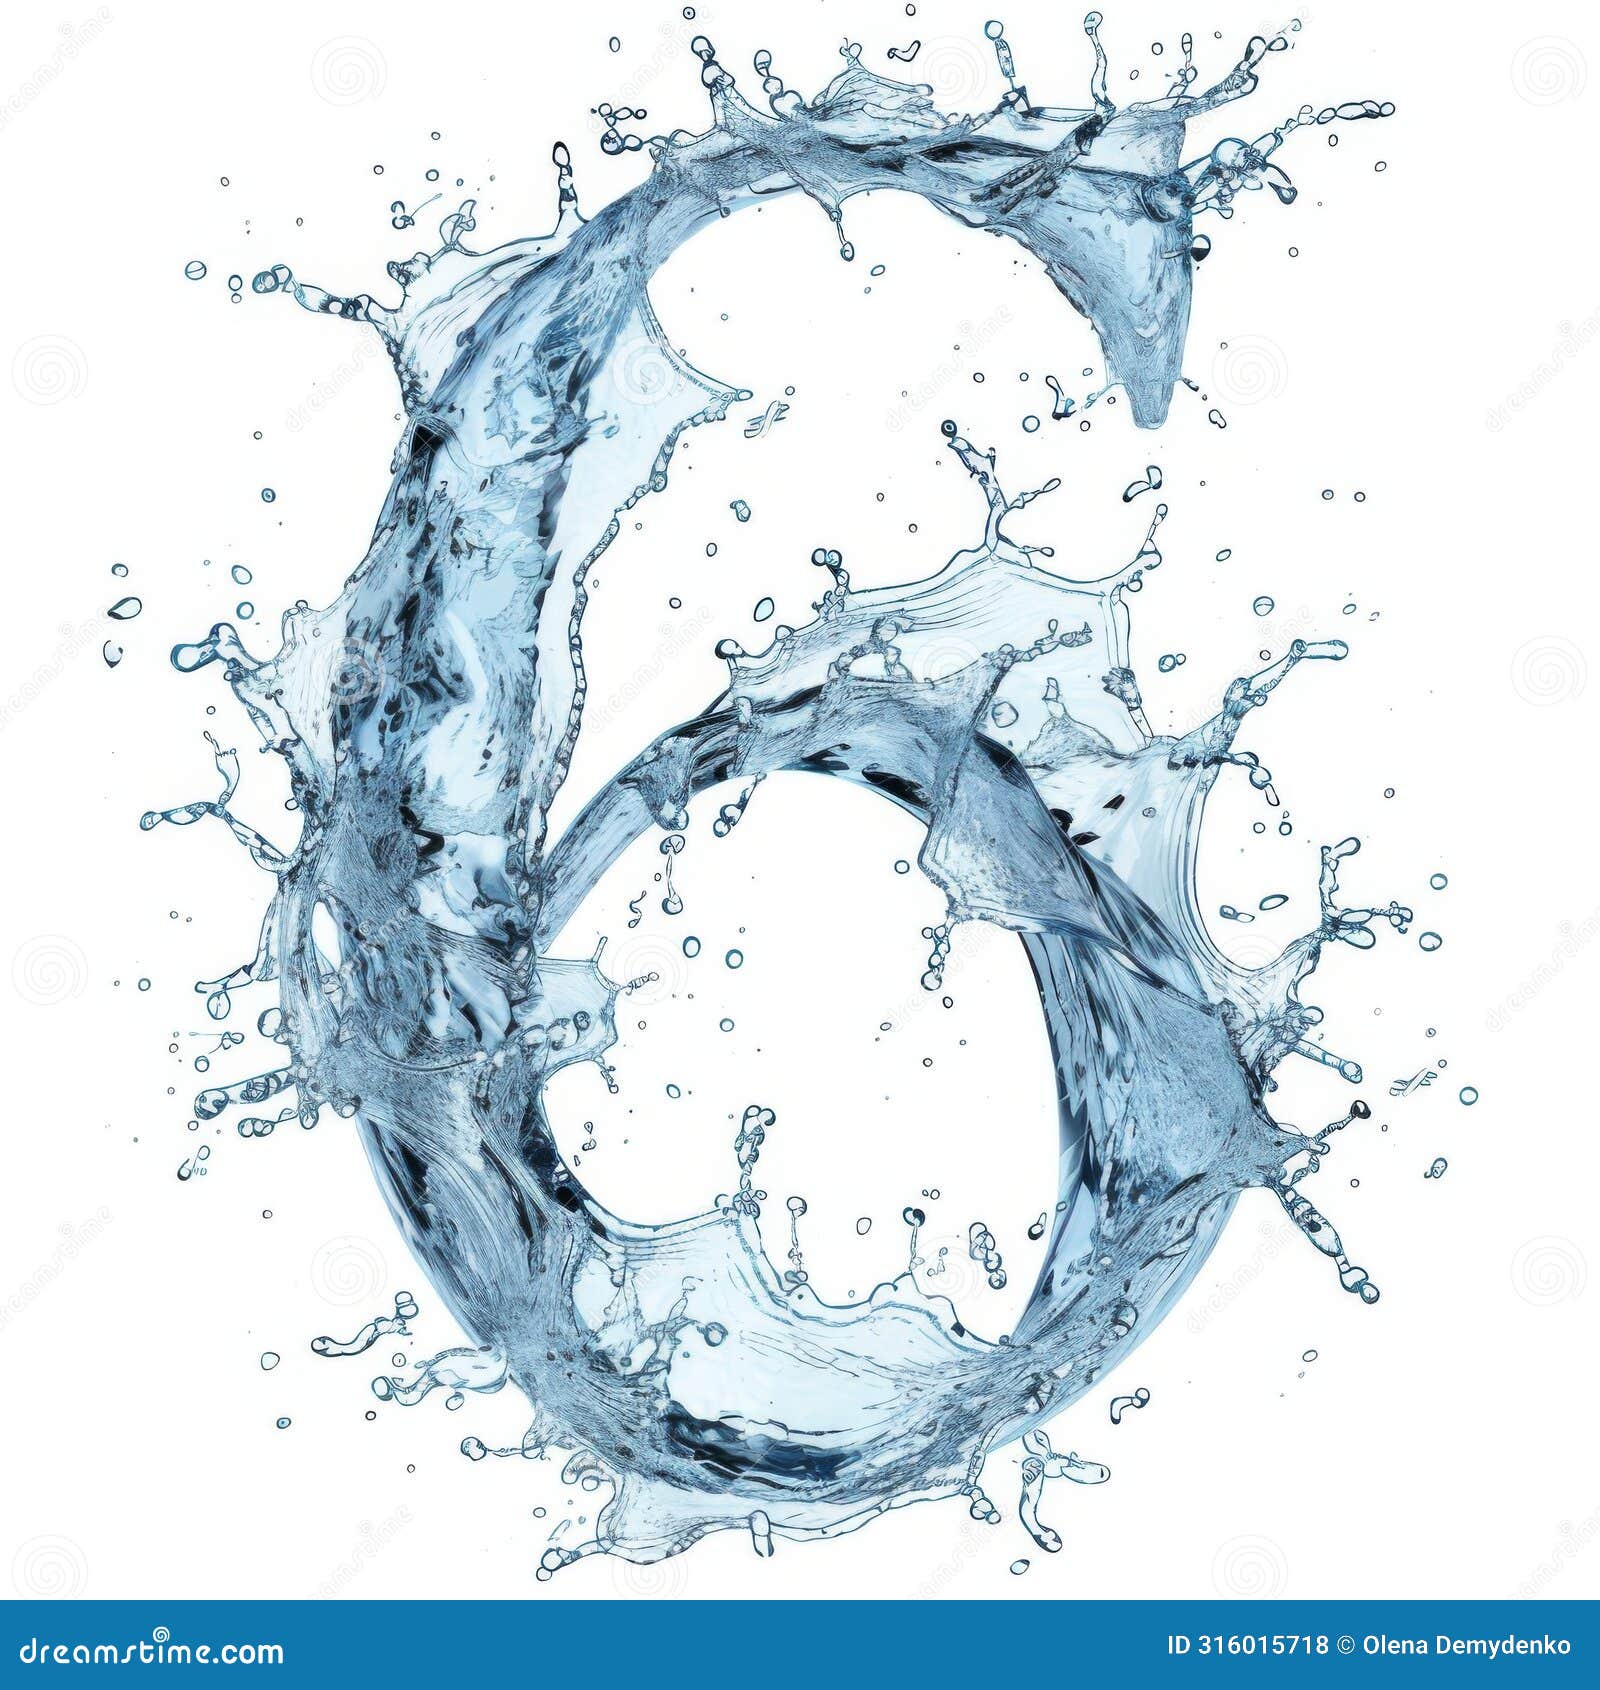 water splashes letter 6. water alphabet number. number six made of water splashes.